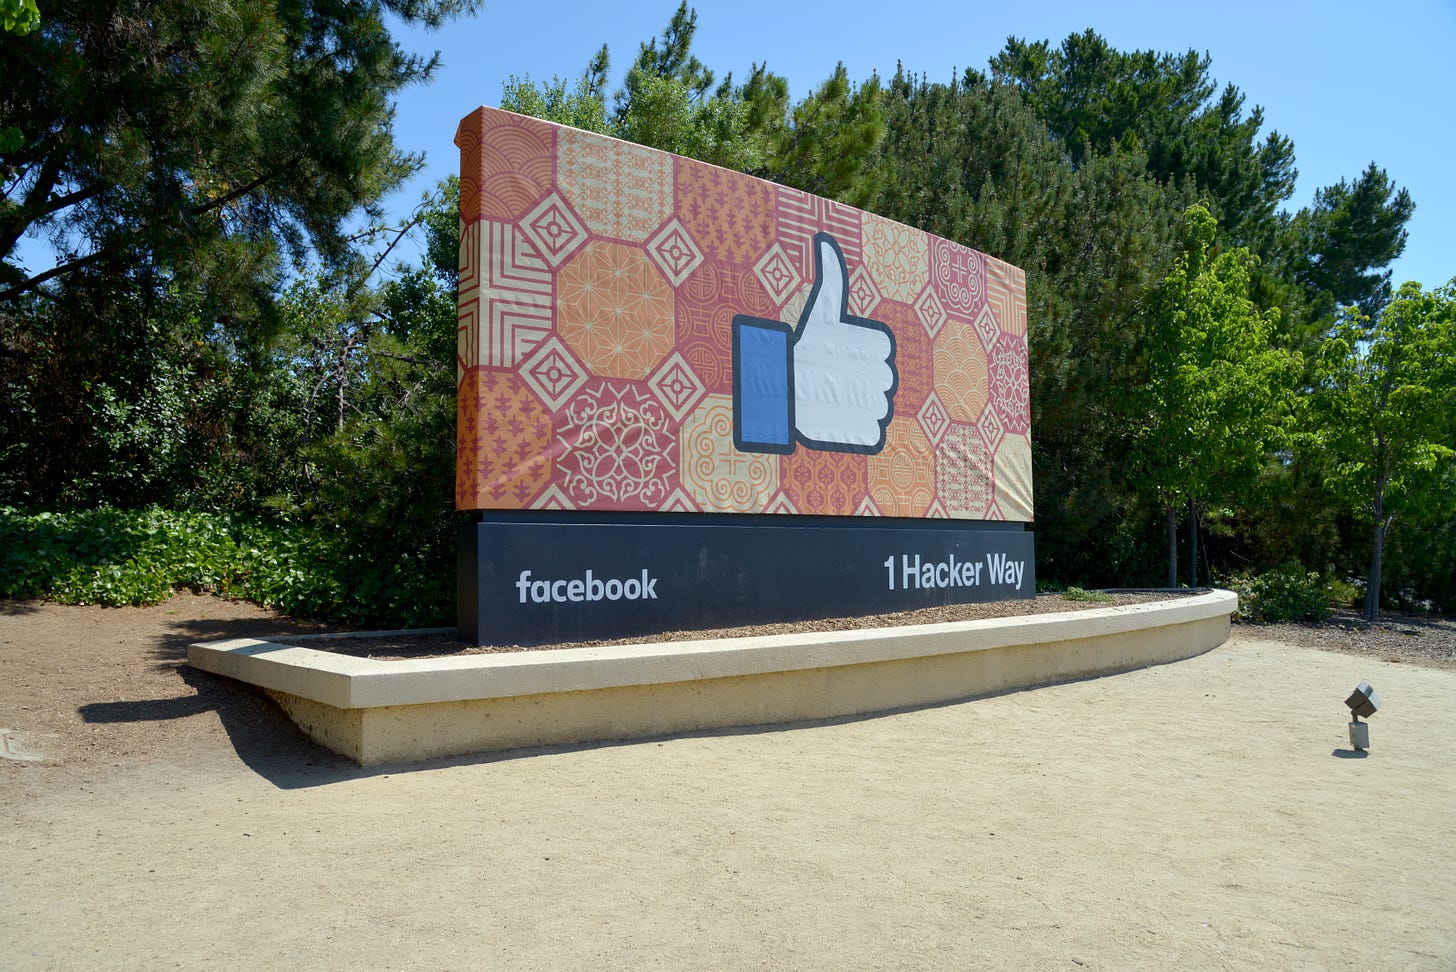 Facebook sign with "Like Button" image.